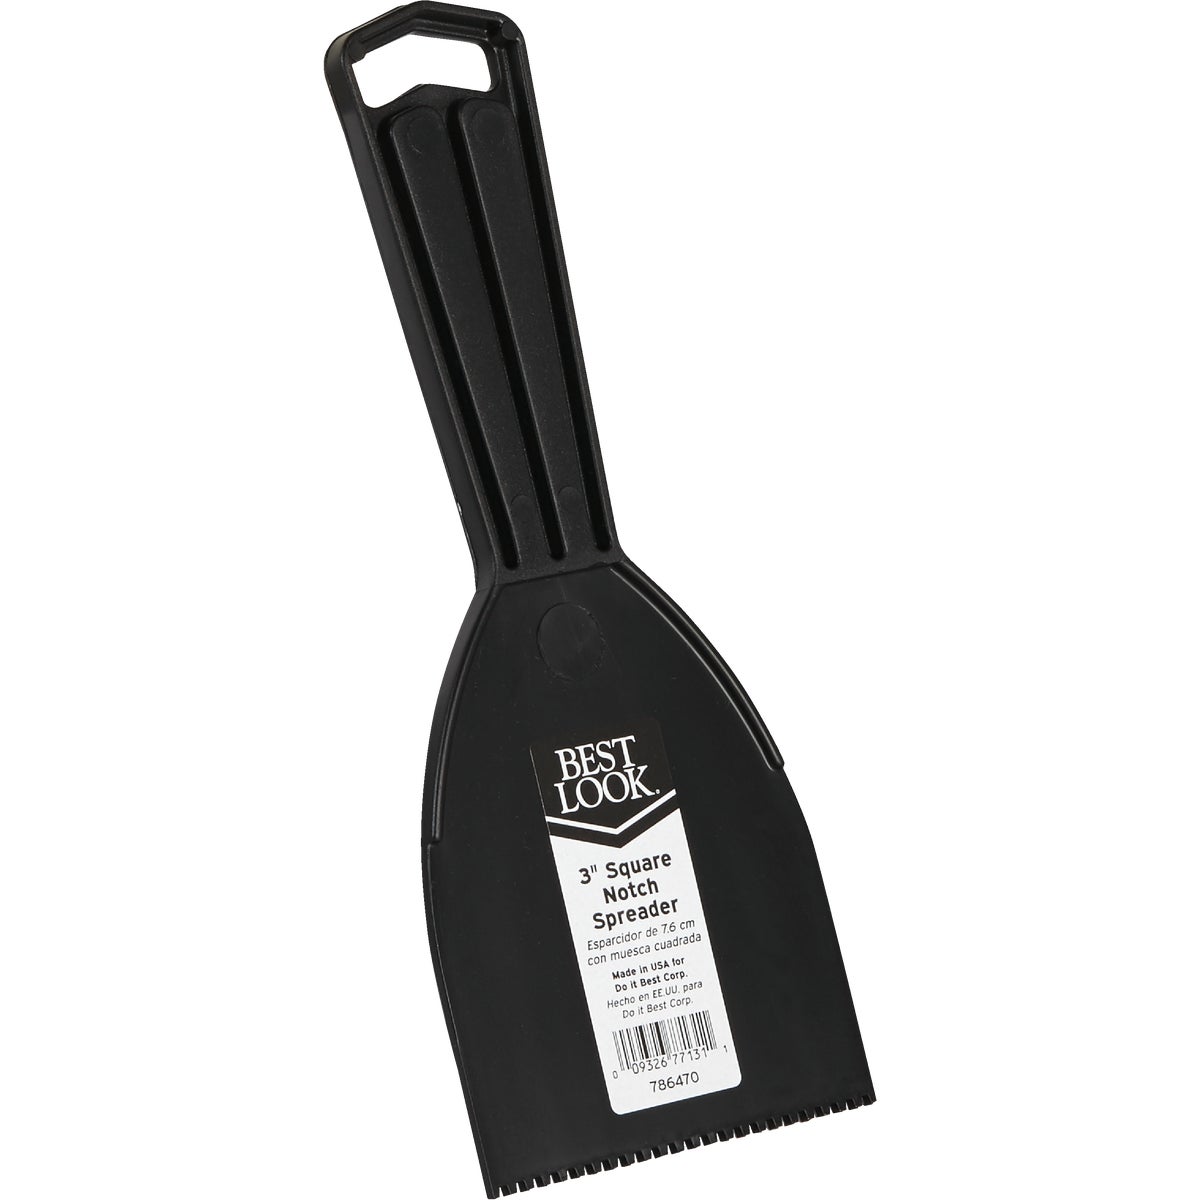 Item 786470, Economical plastic spreaders for applying adhesives and mastics.